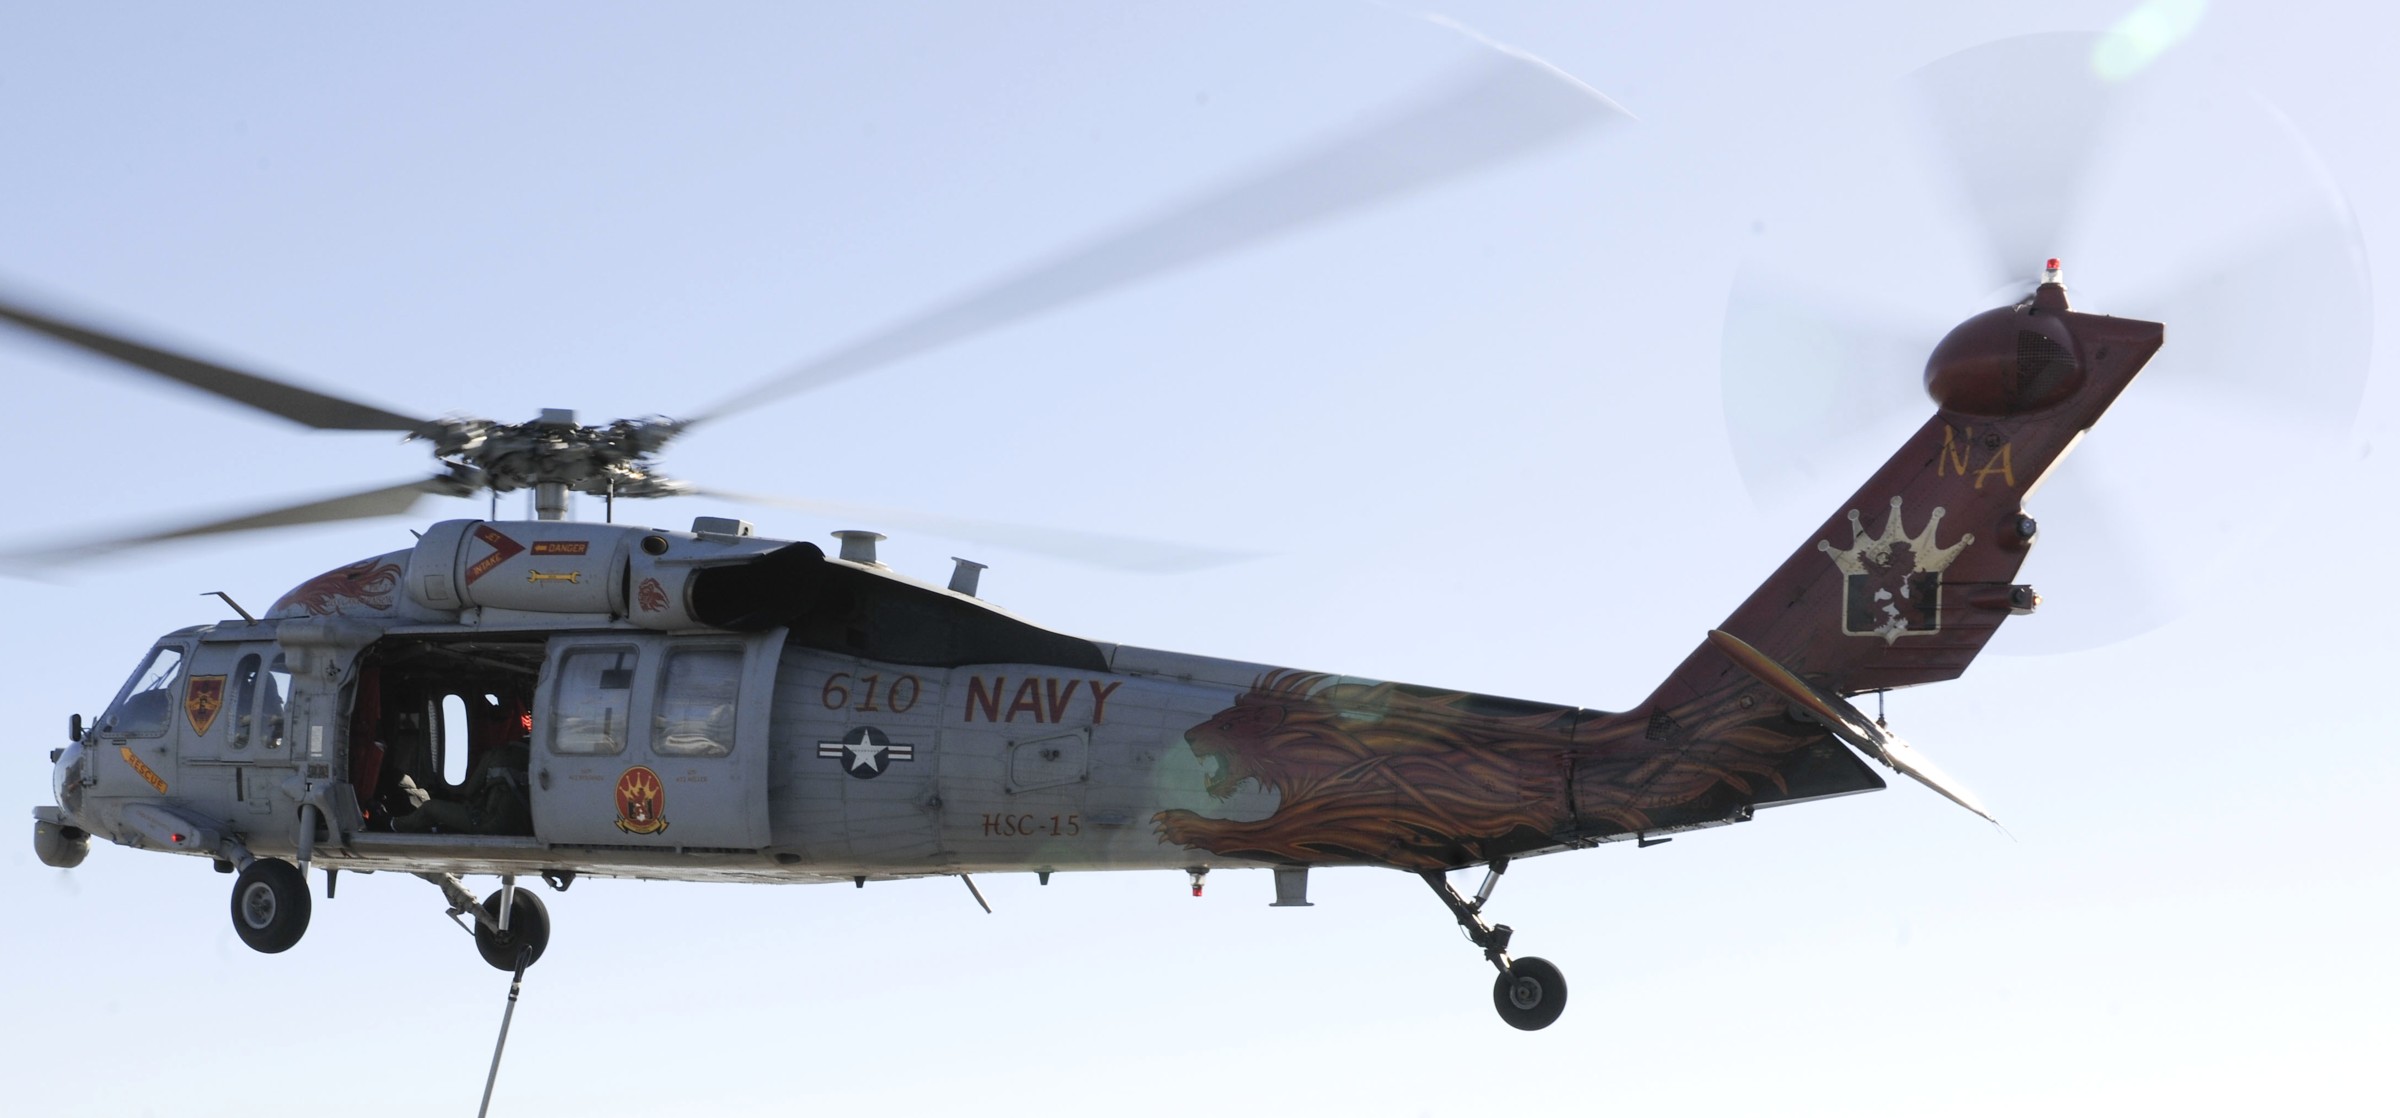 hsc-15 red lions helicopter sea combat squadron us navy mh-60s seahawk cvw-17 uss theodore roosevelt cvn-71 98